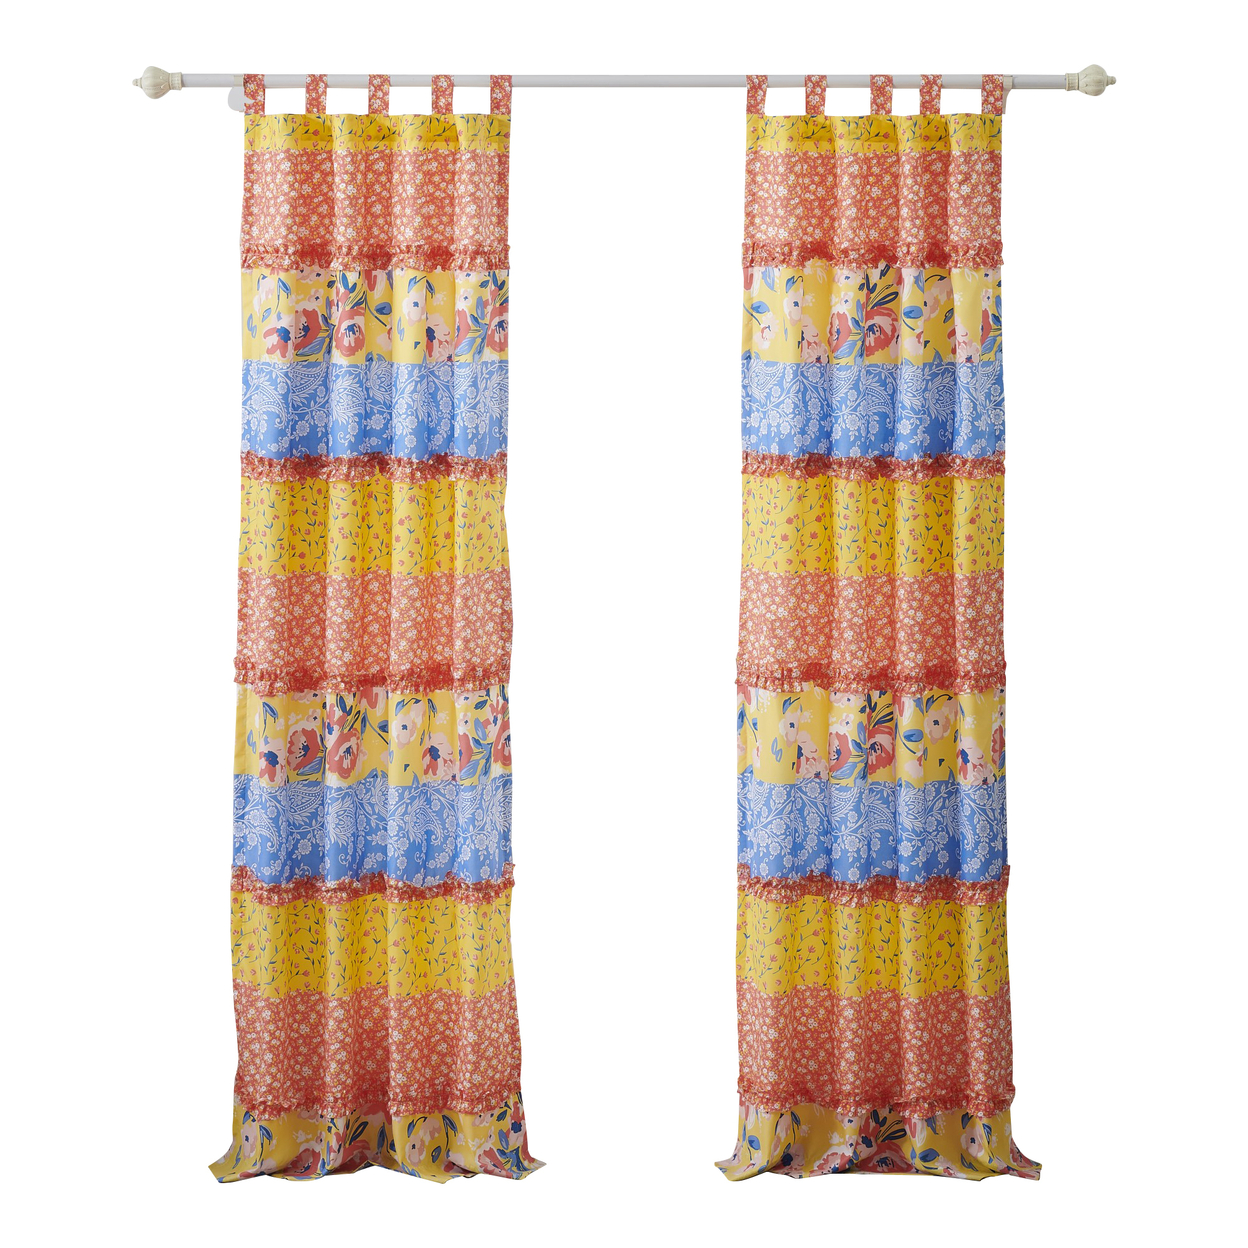 Lio Set Of 2 Tab Top Curtain Pairs With Ruffled Rows, Bohemian, Multicolor